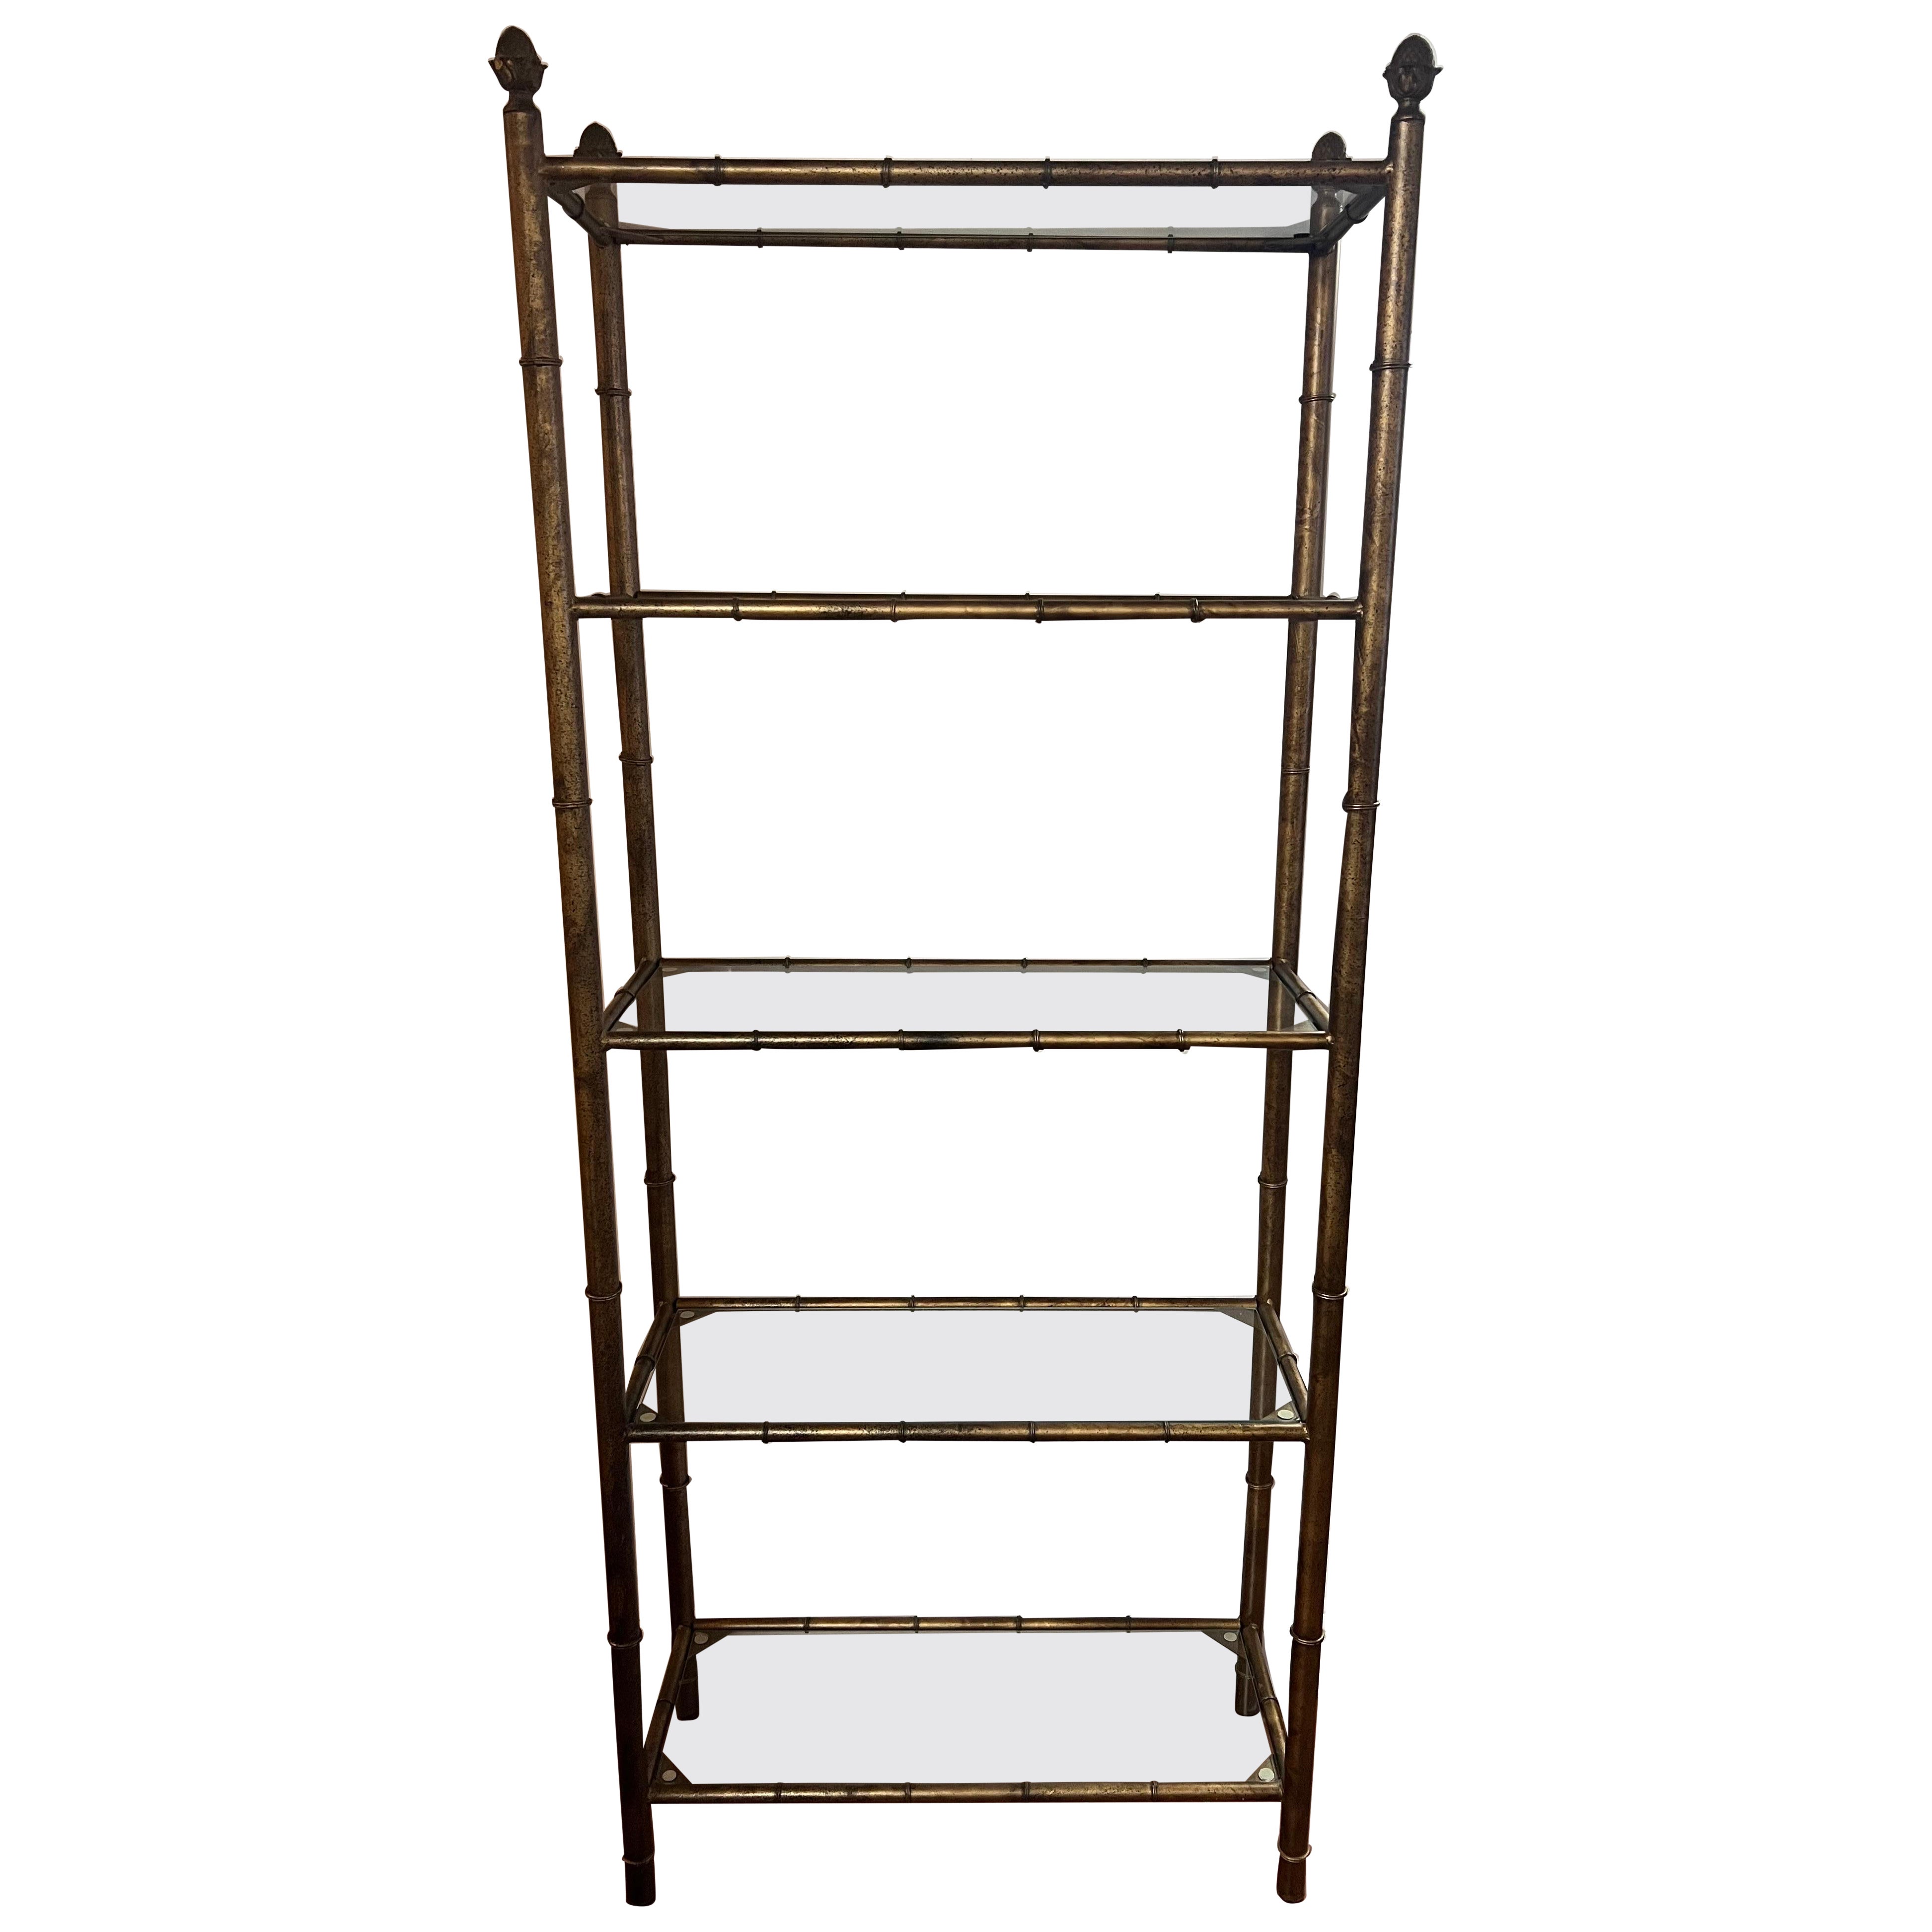 Faux Bamboo Etagere with Acorn Finials